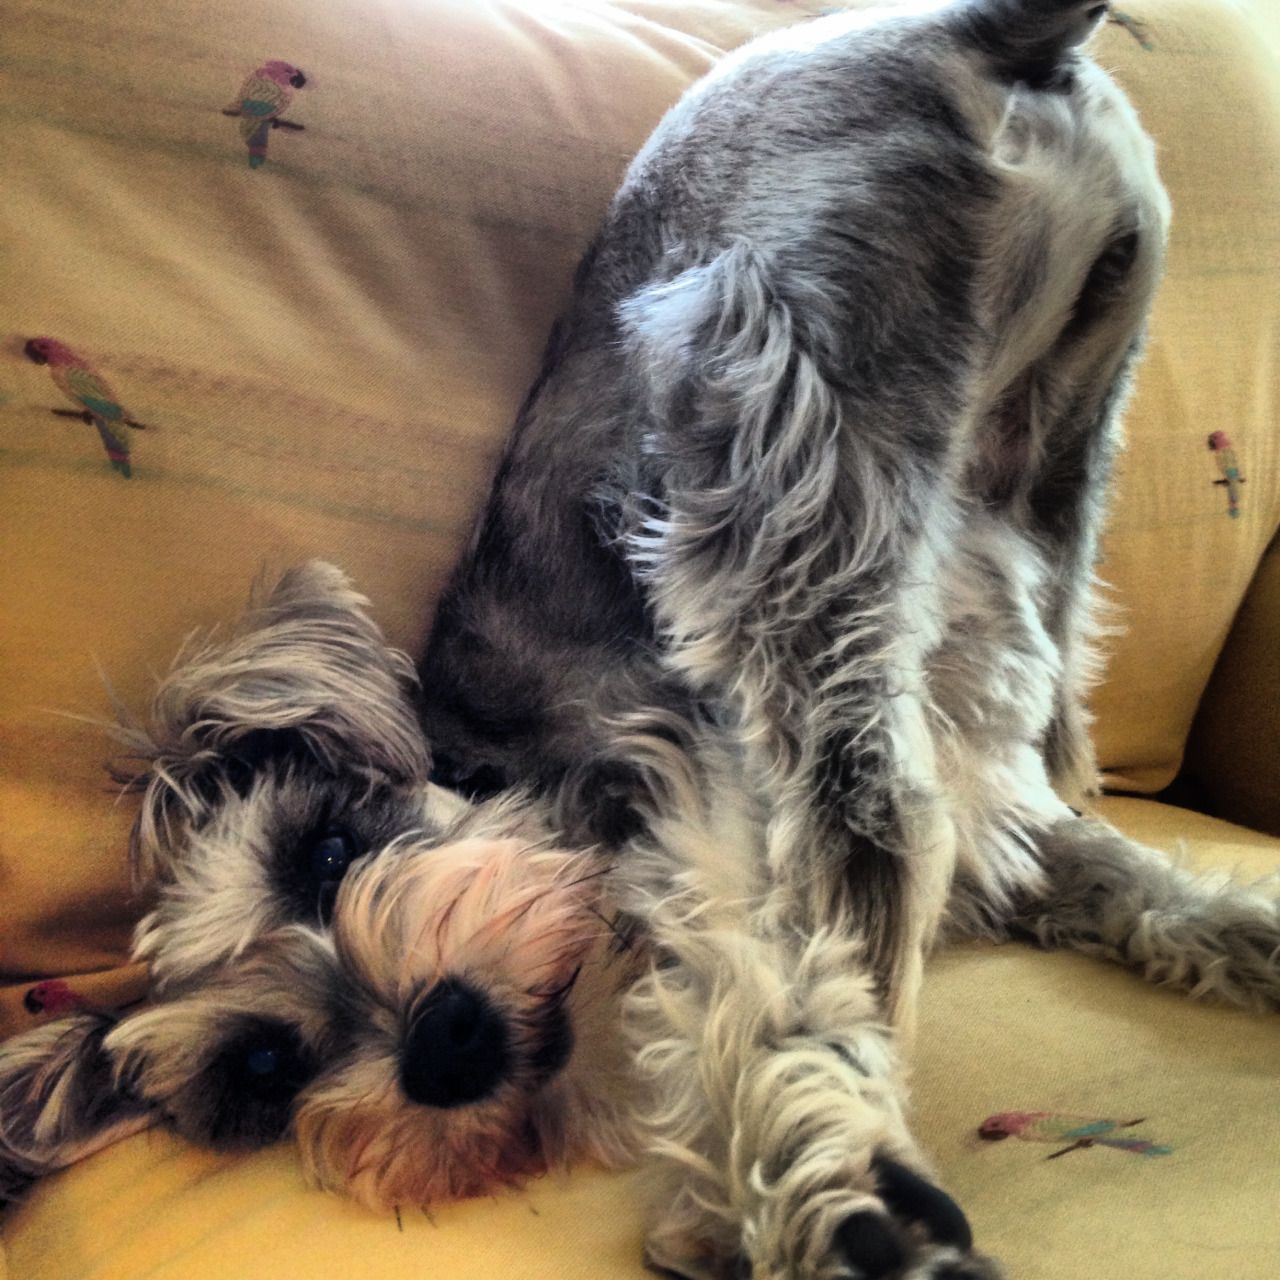 Schnauzer lying on the couch with its butt up